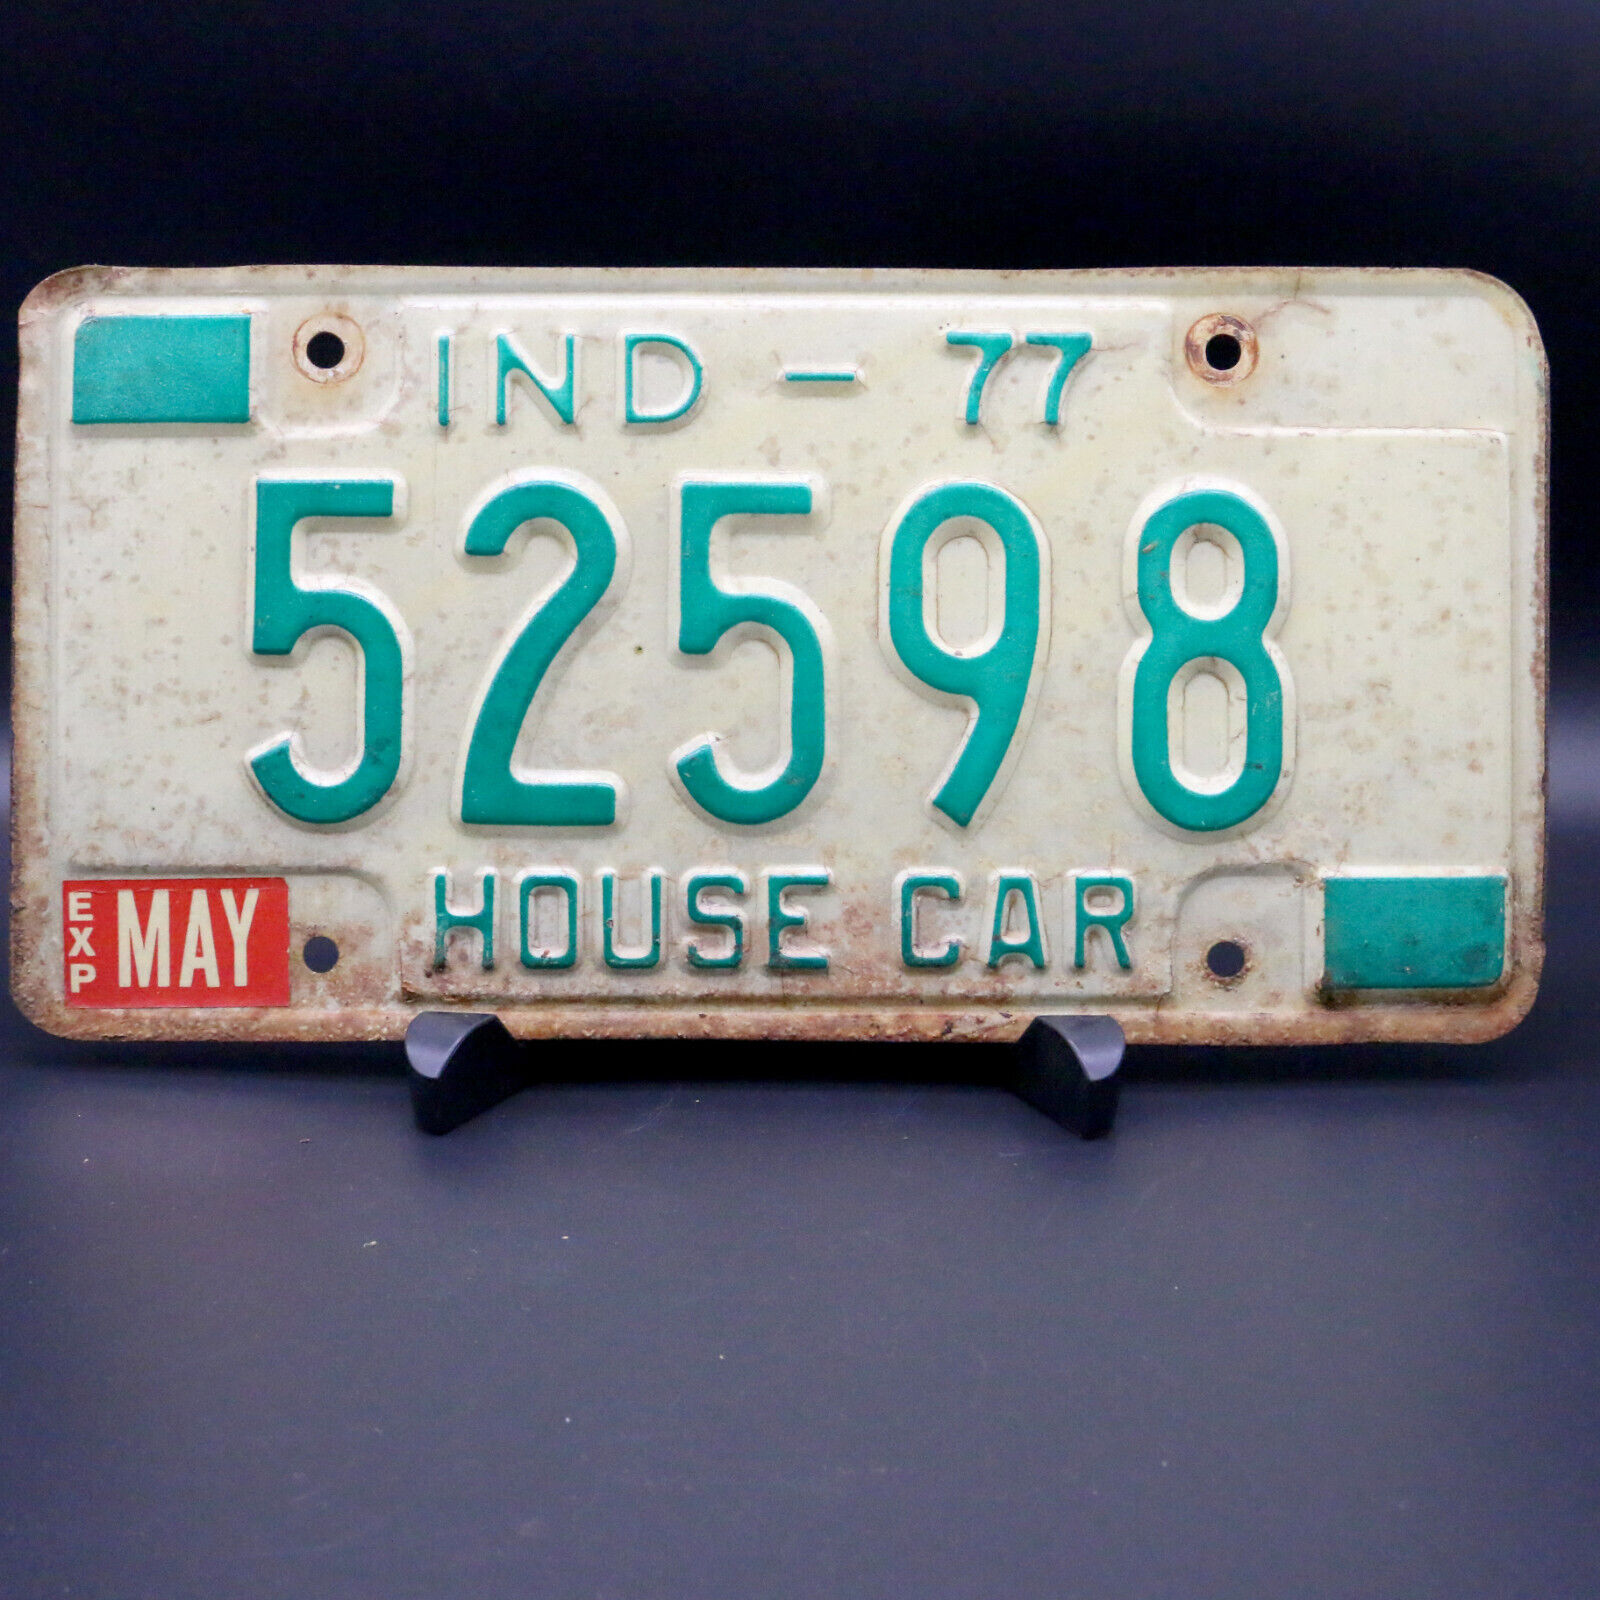 1977 Indiana 52598 HOUSE CAR License Plate Expired Car Tag - White and Green